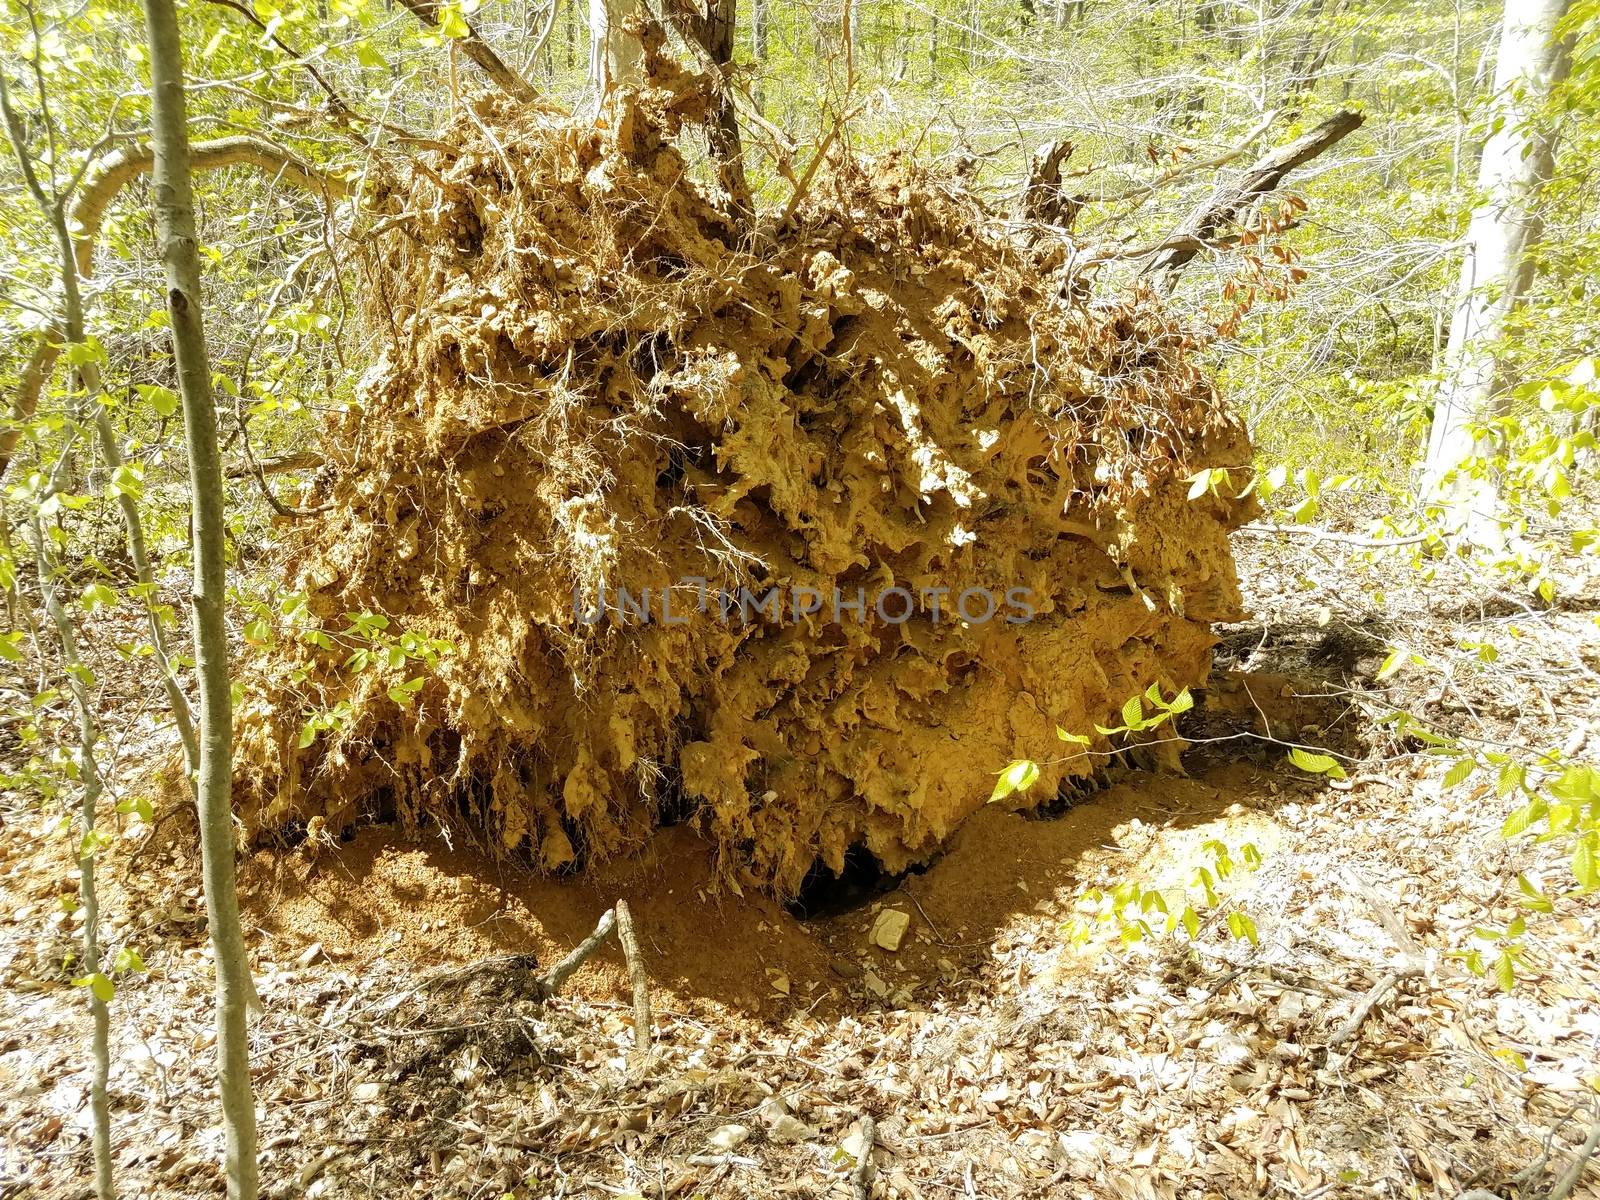 fallen tree with tree roots and dirt in forest or woods by stockphotofan1